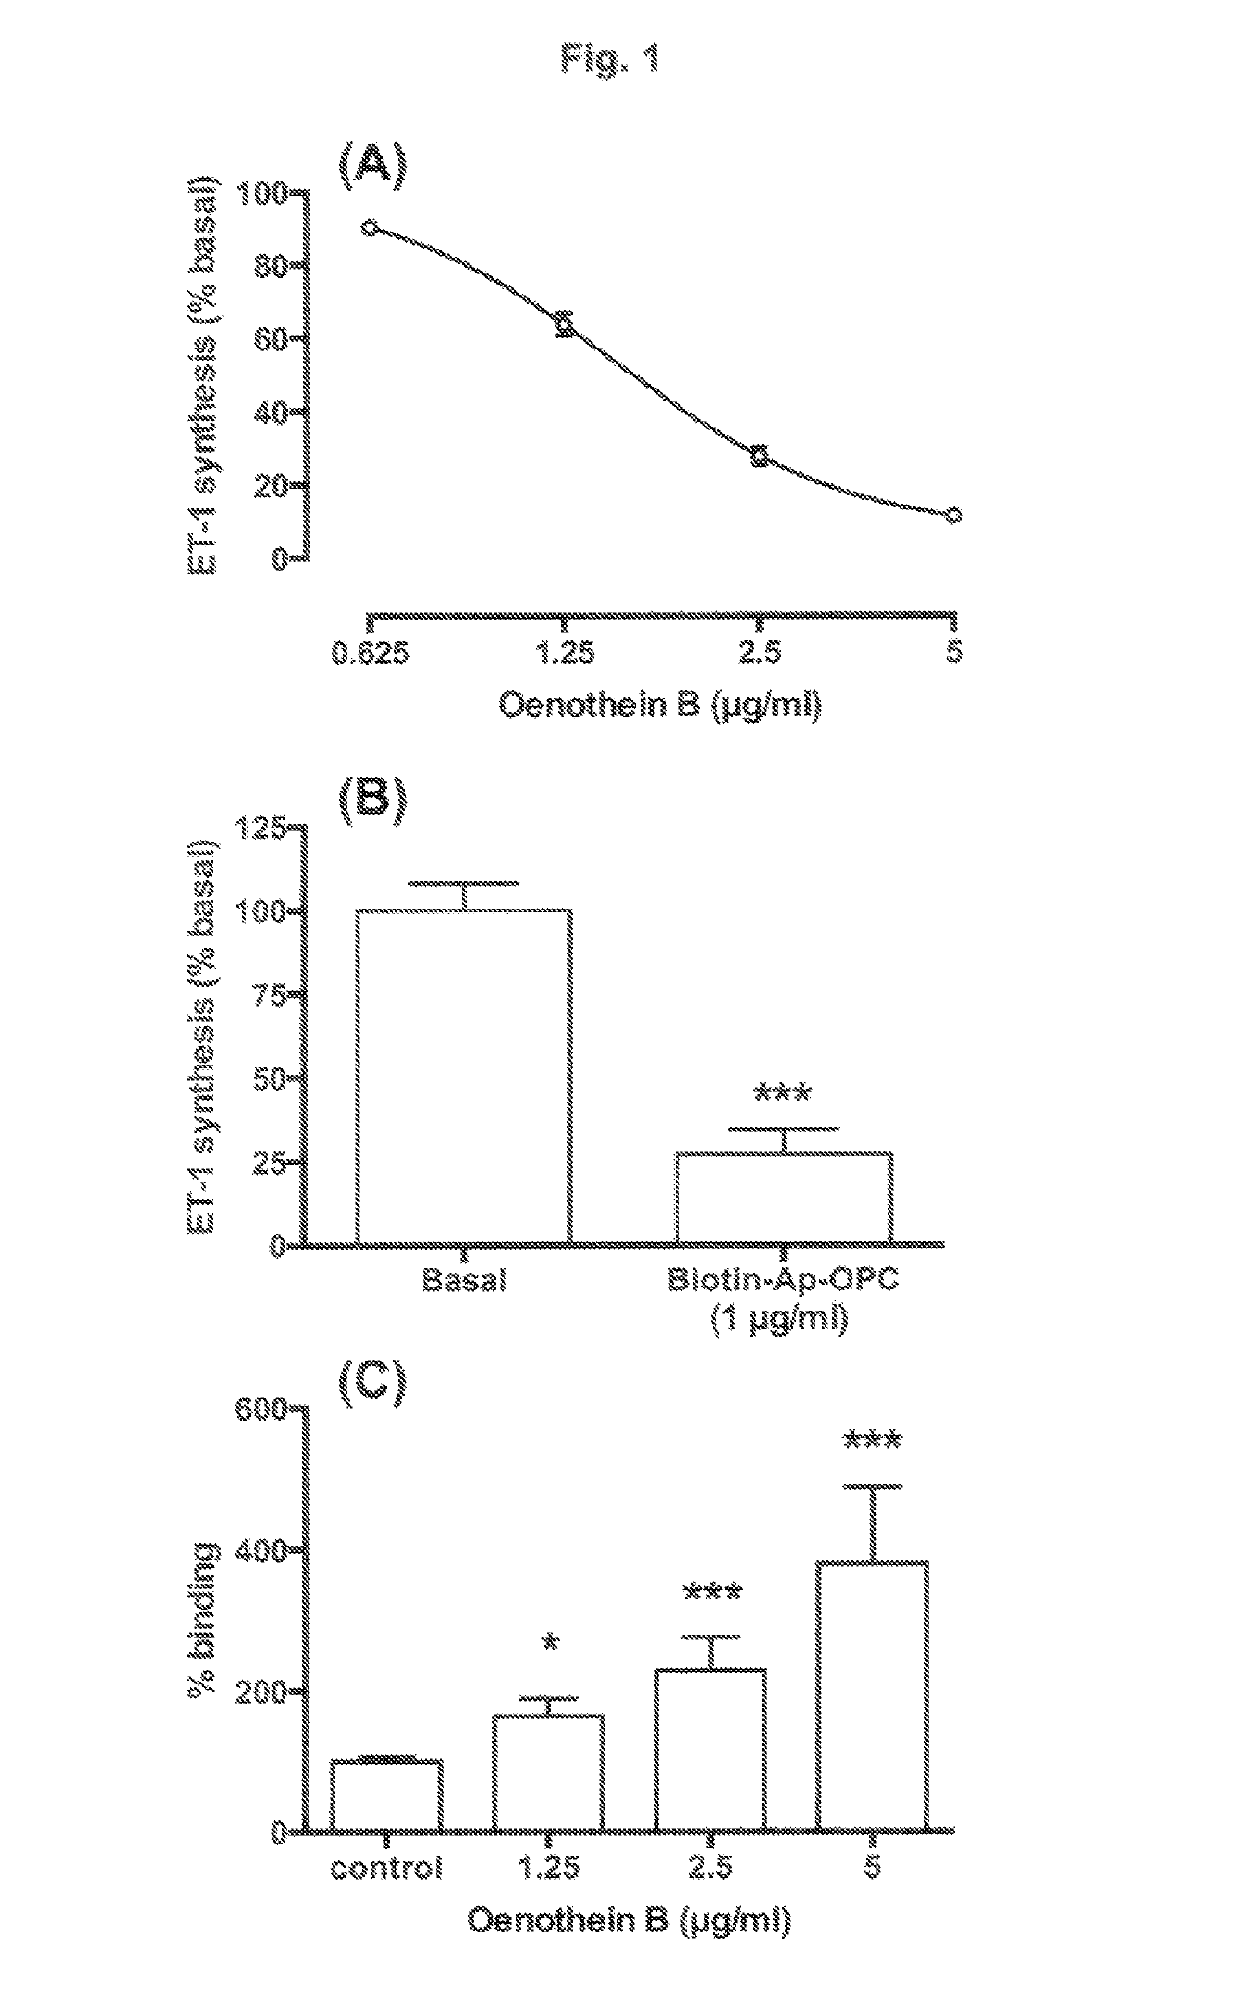 Method of treating endothelial dysfunction with oenothein B and proanthocyanidins